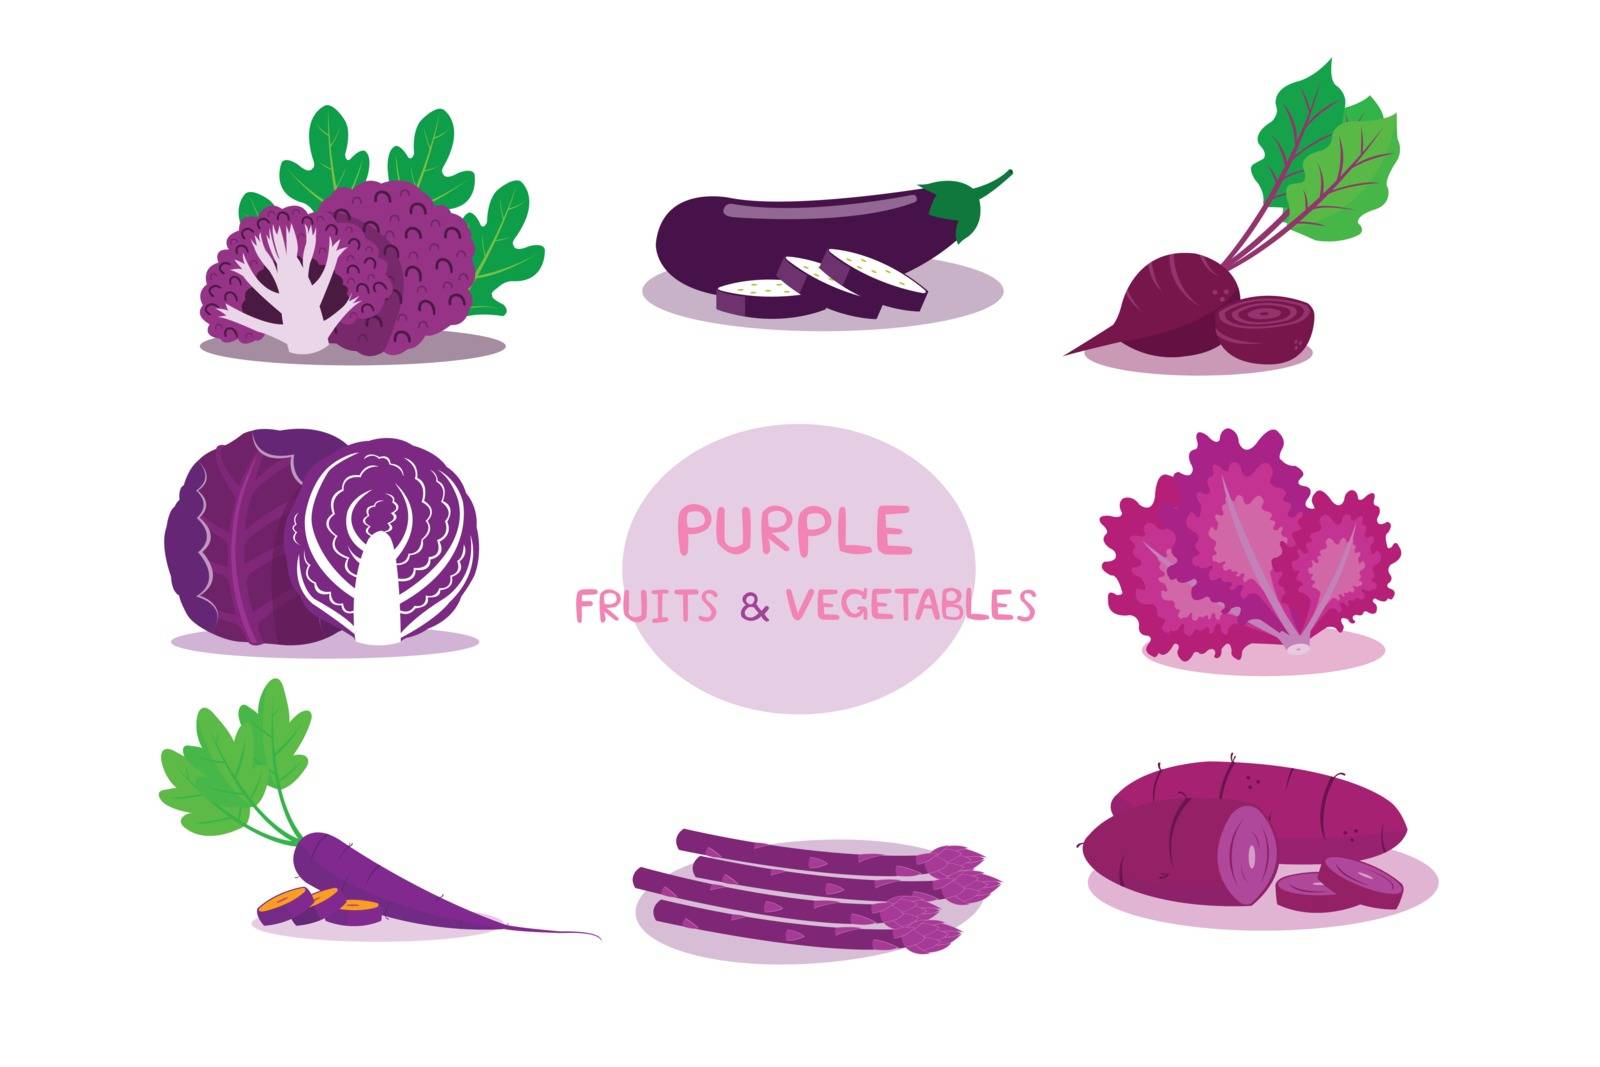 Purple fruits and vegetables isolated on white background.